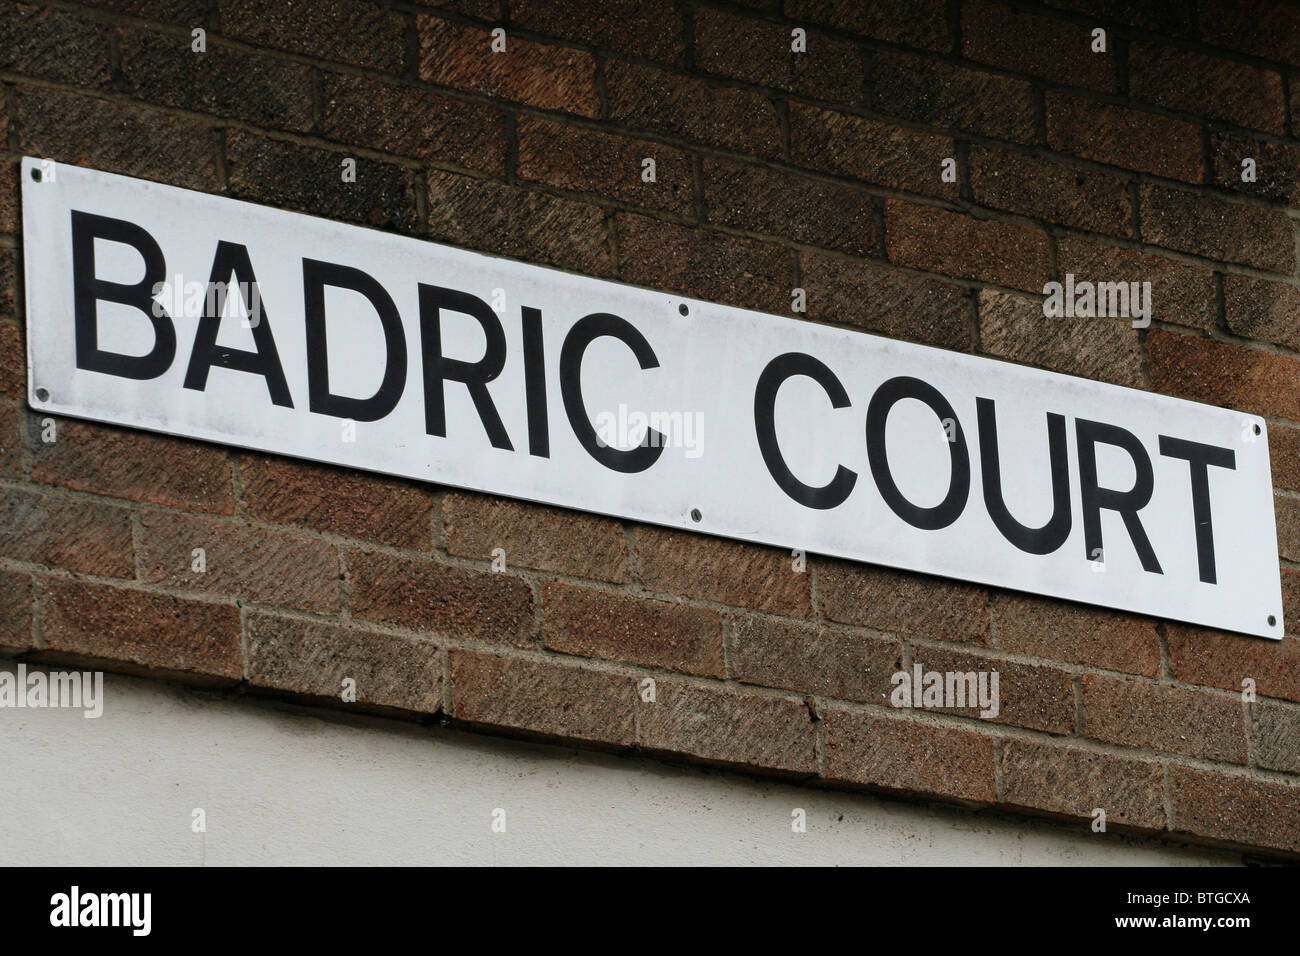 Badric Court street sign in Battersea, South London. Stock Photo